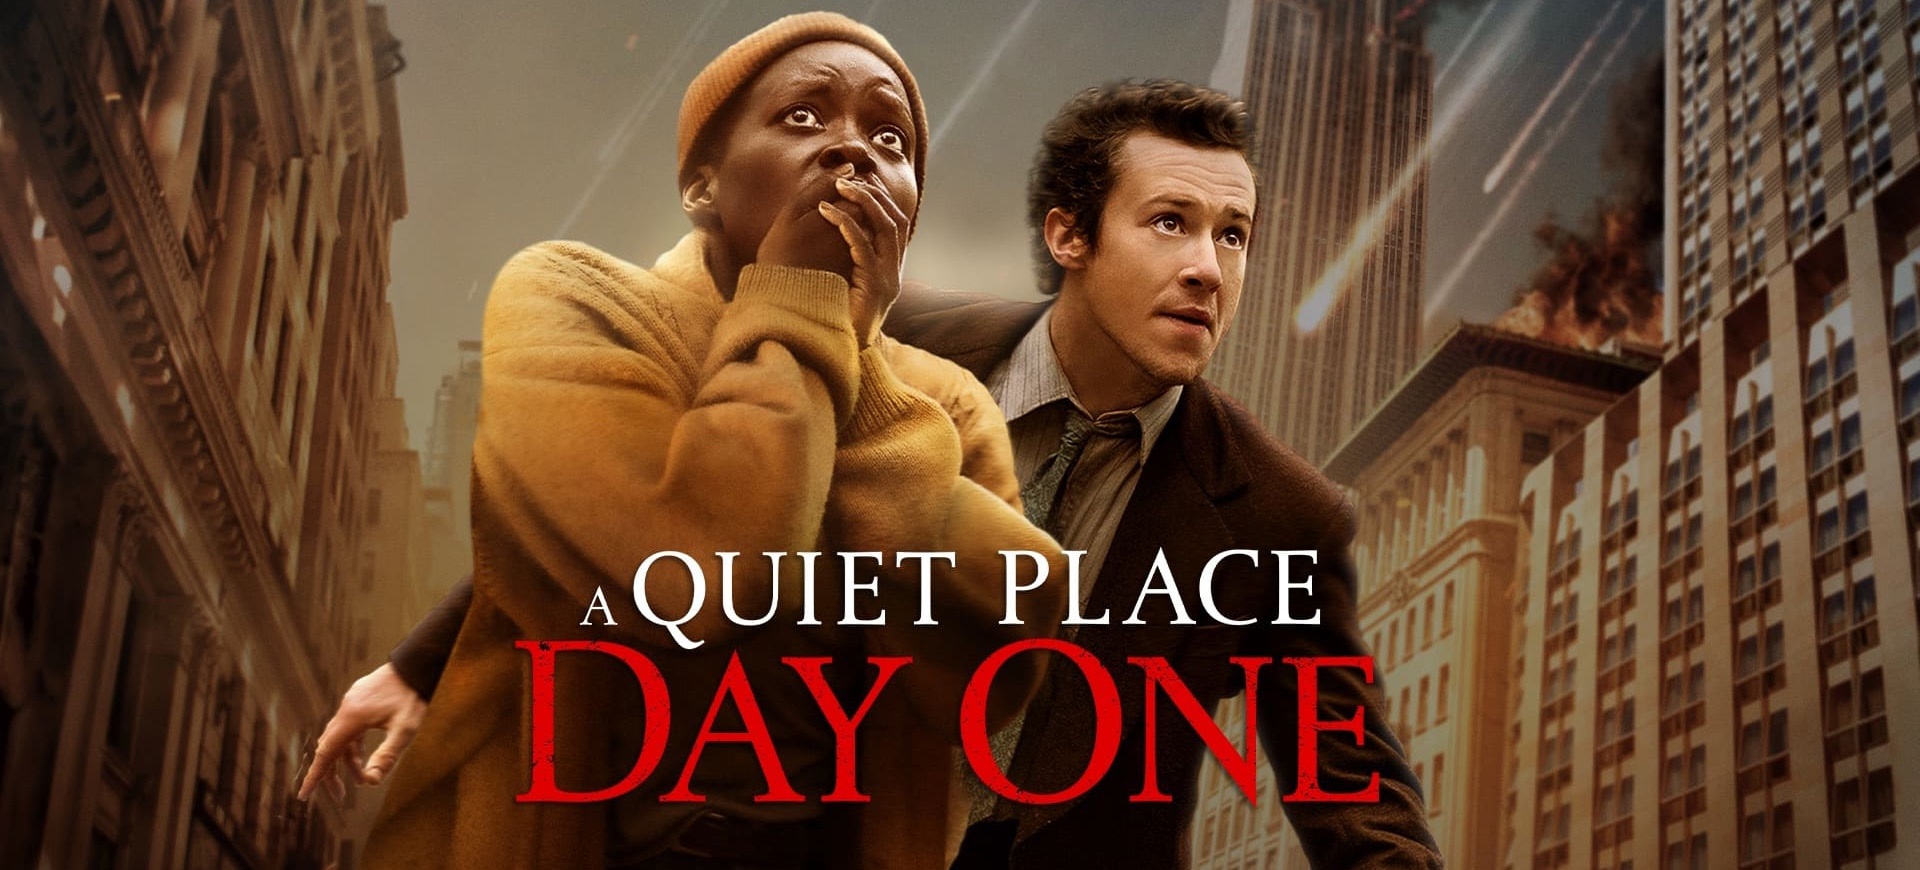 A QUIET PLACE: DAY ONE